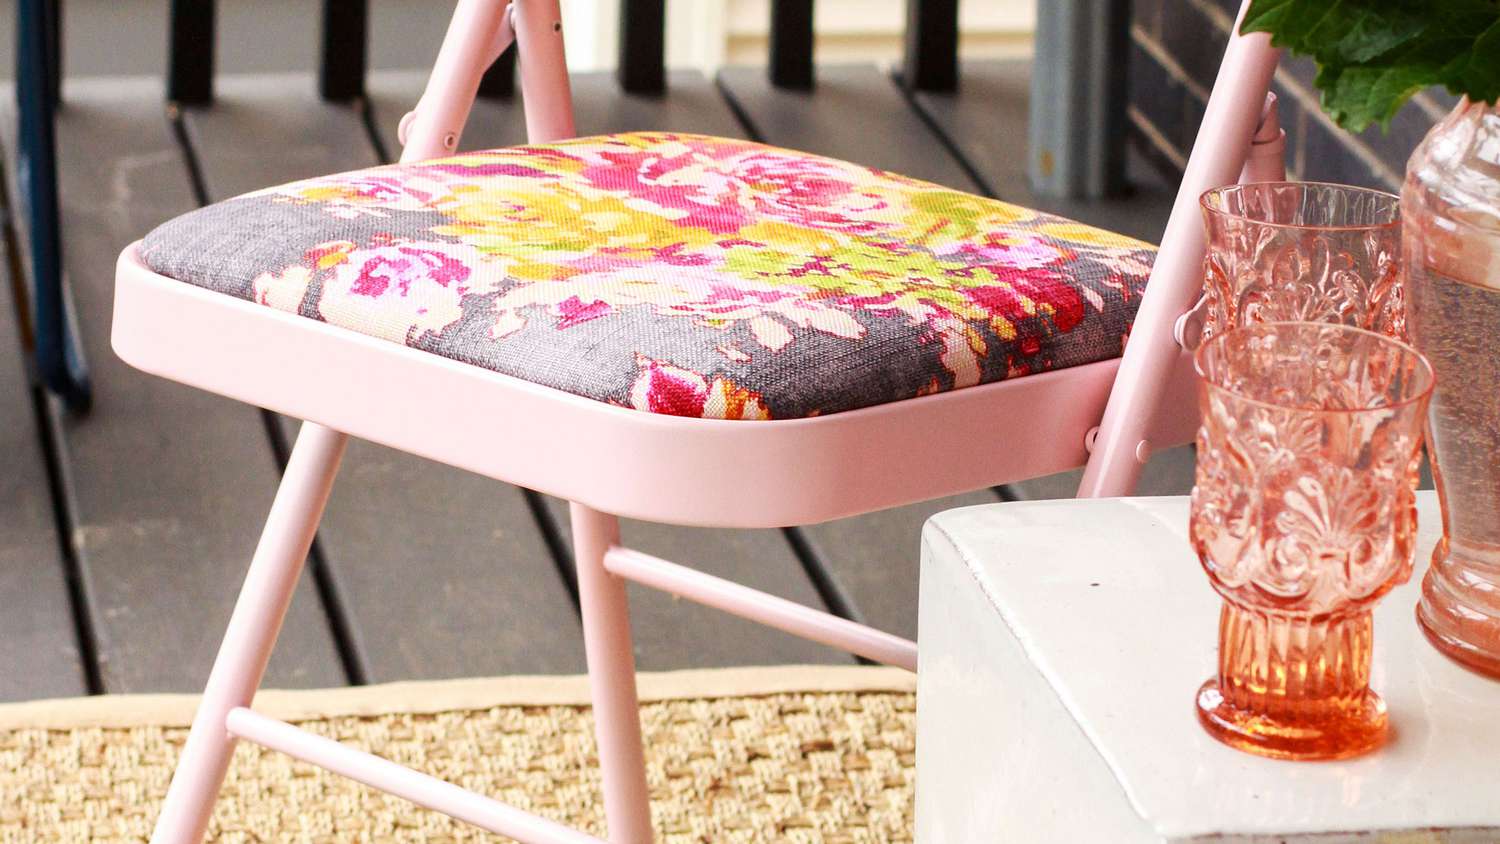 How To Paint And Reupholster An Upcycled Folding Chair Martha Stewart